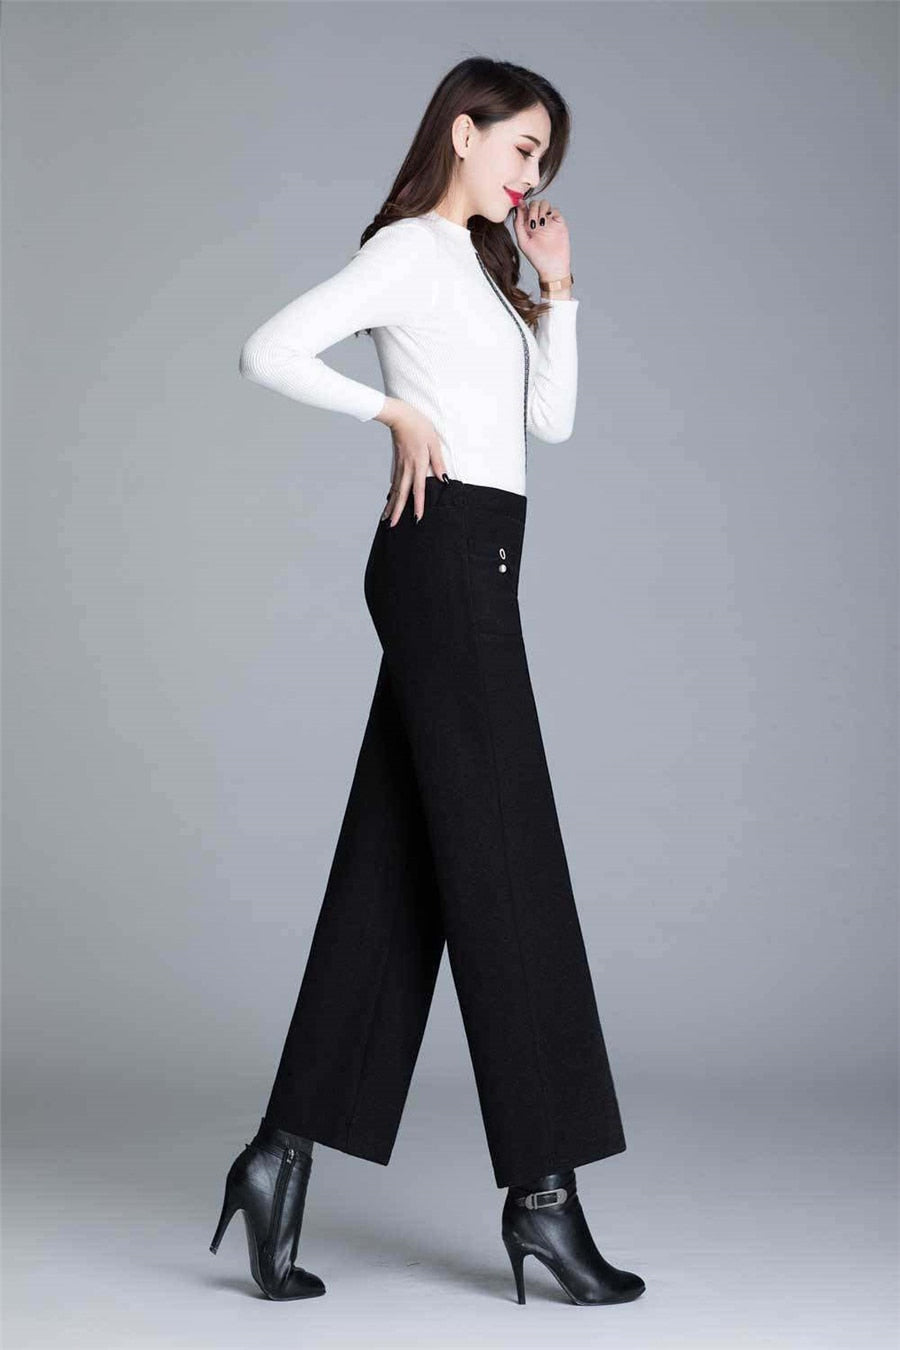 JuliaFashion-Pendent Chic High Waist Loose Classic Straight Trousers